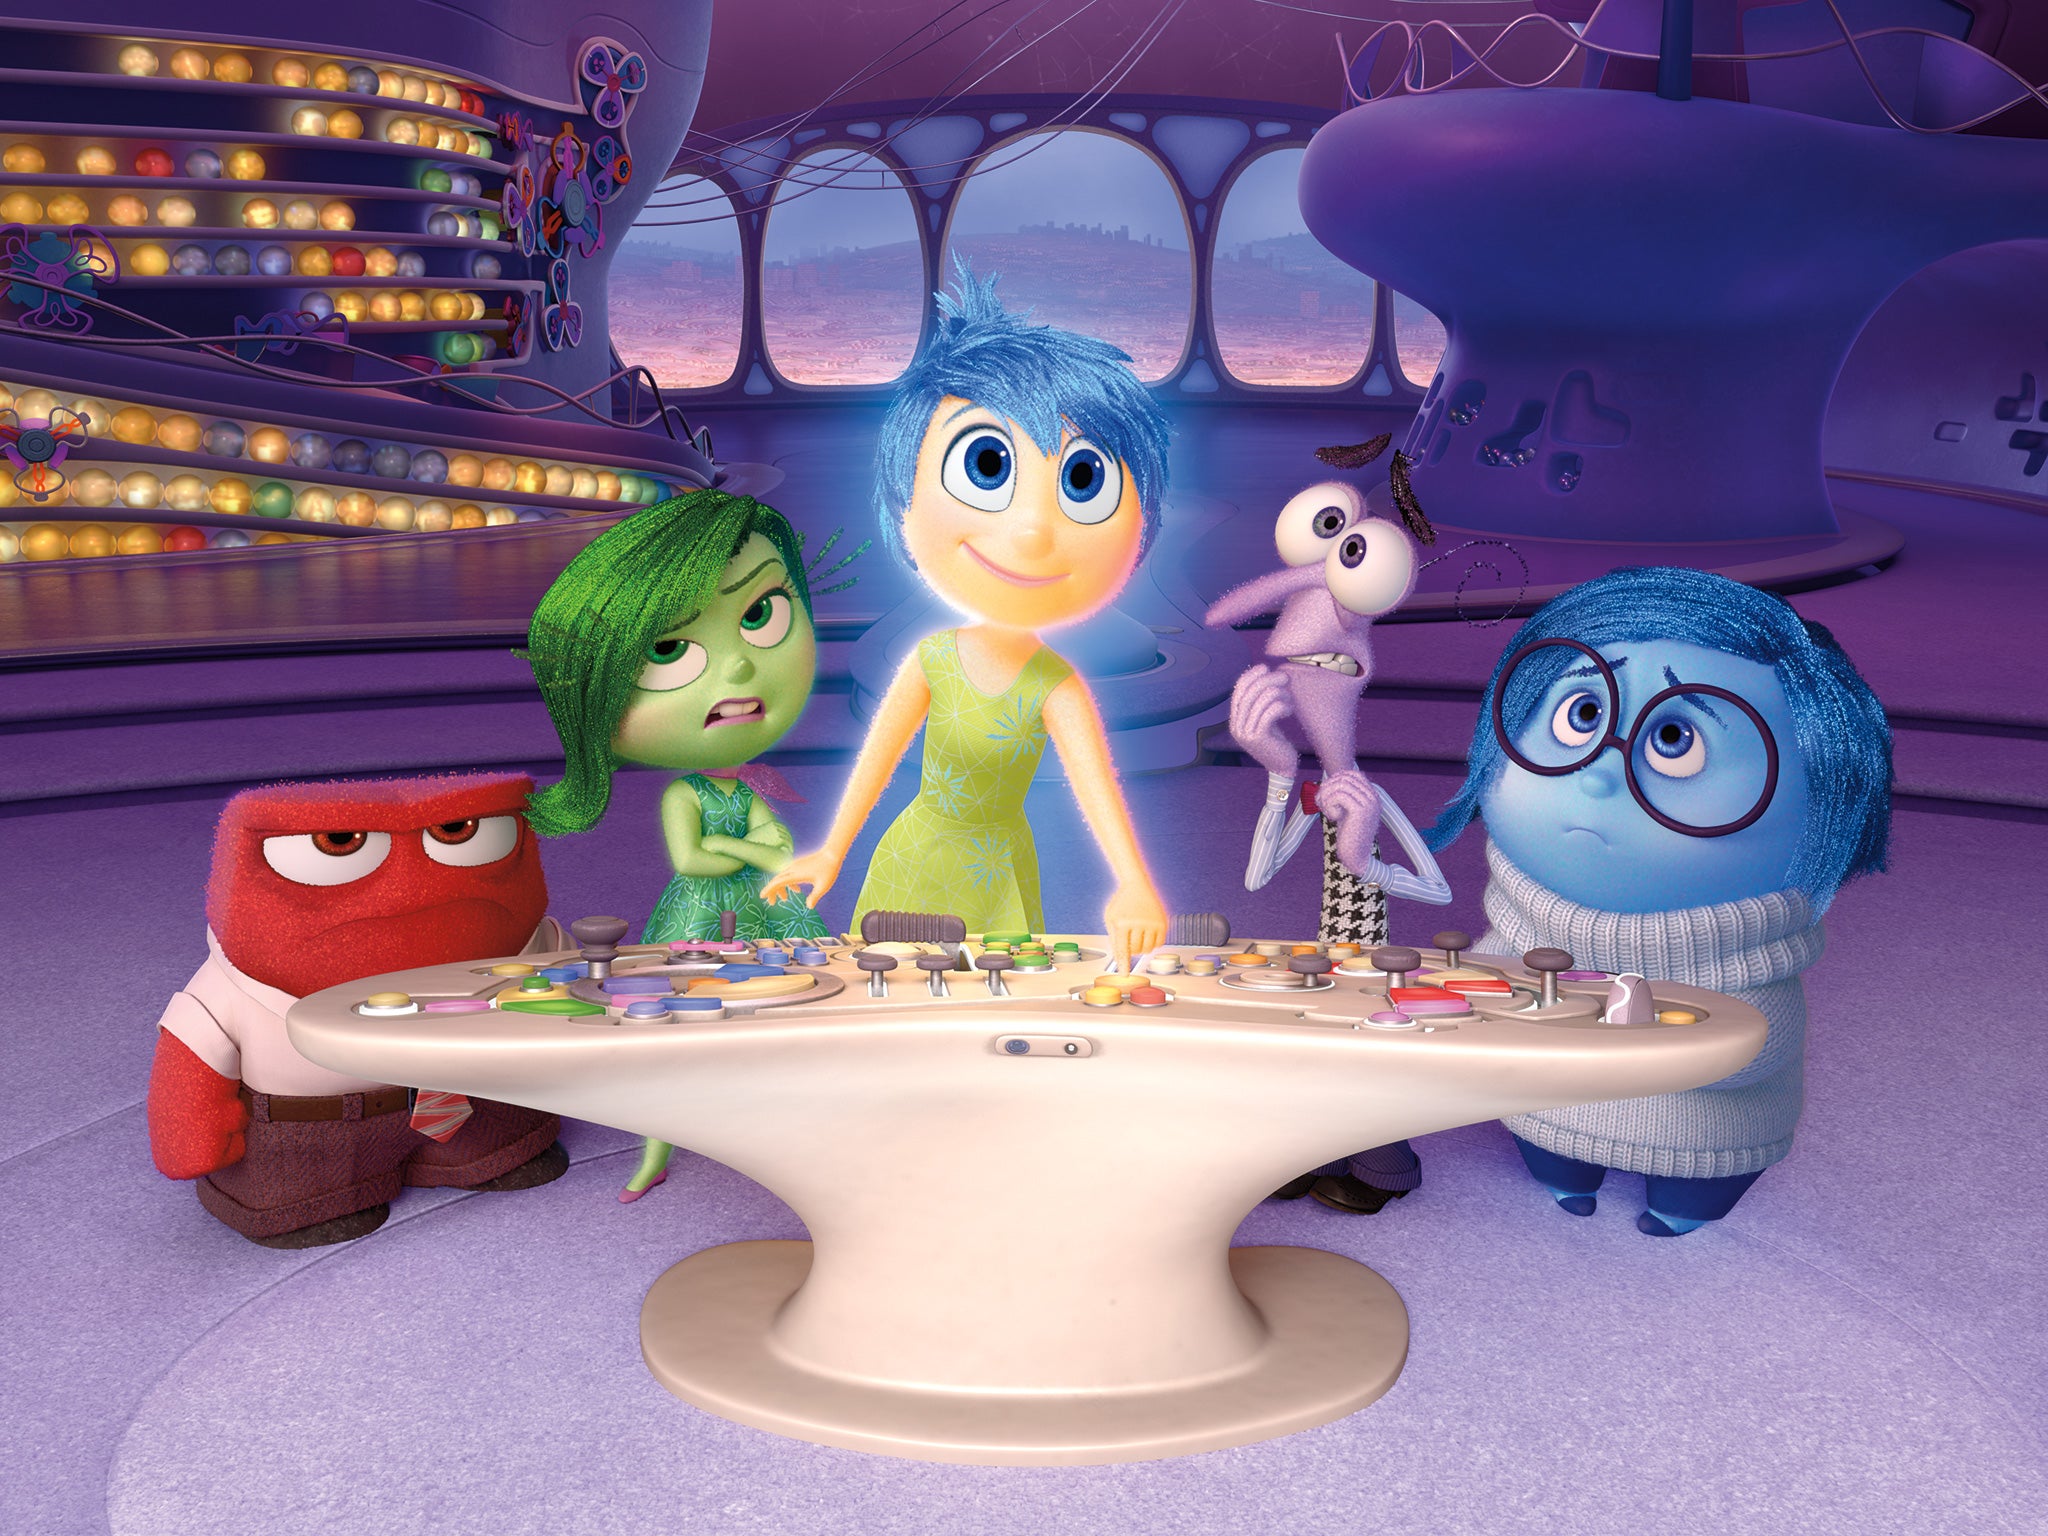 Labour's leadership contest is the battle of emotions going on in Riley's troubled head in the new Pixar film Inside Out, with each vying for control